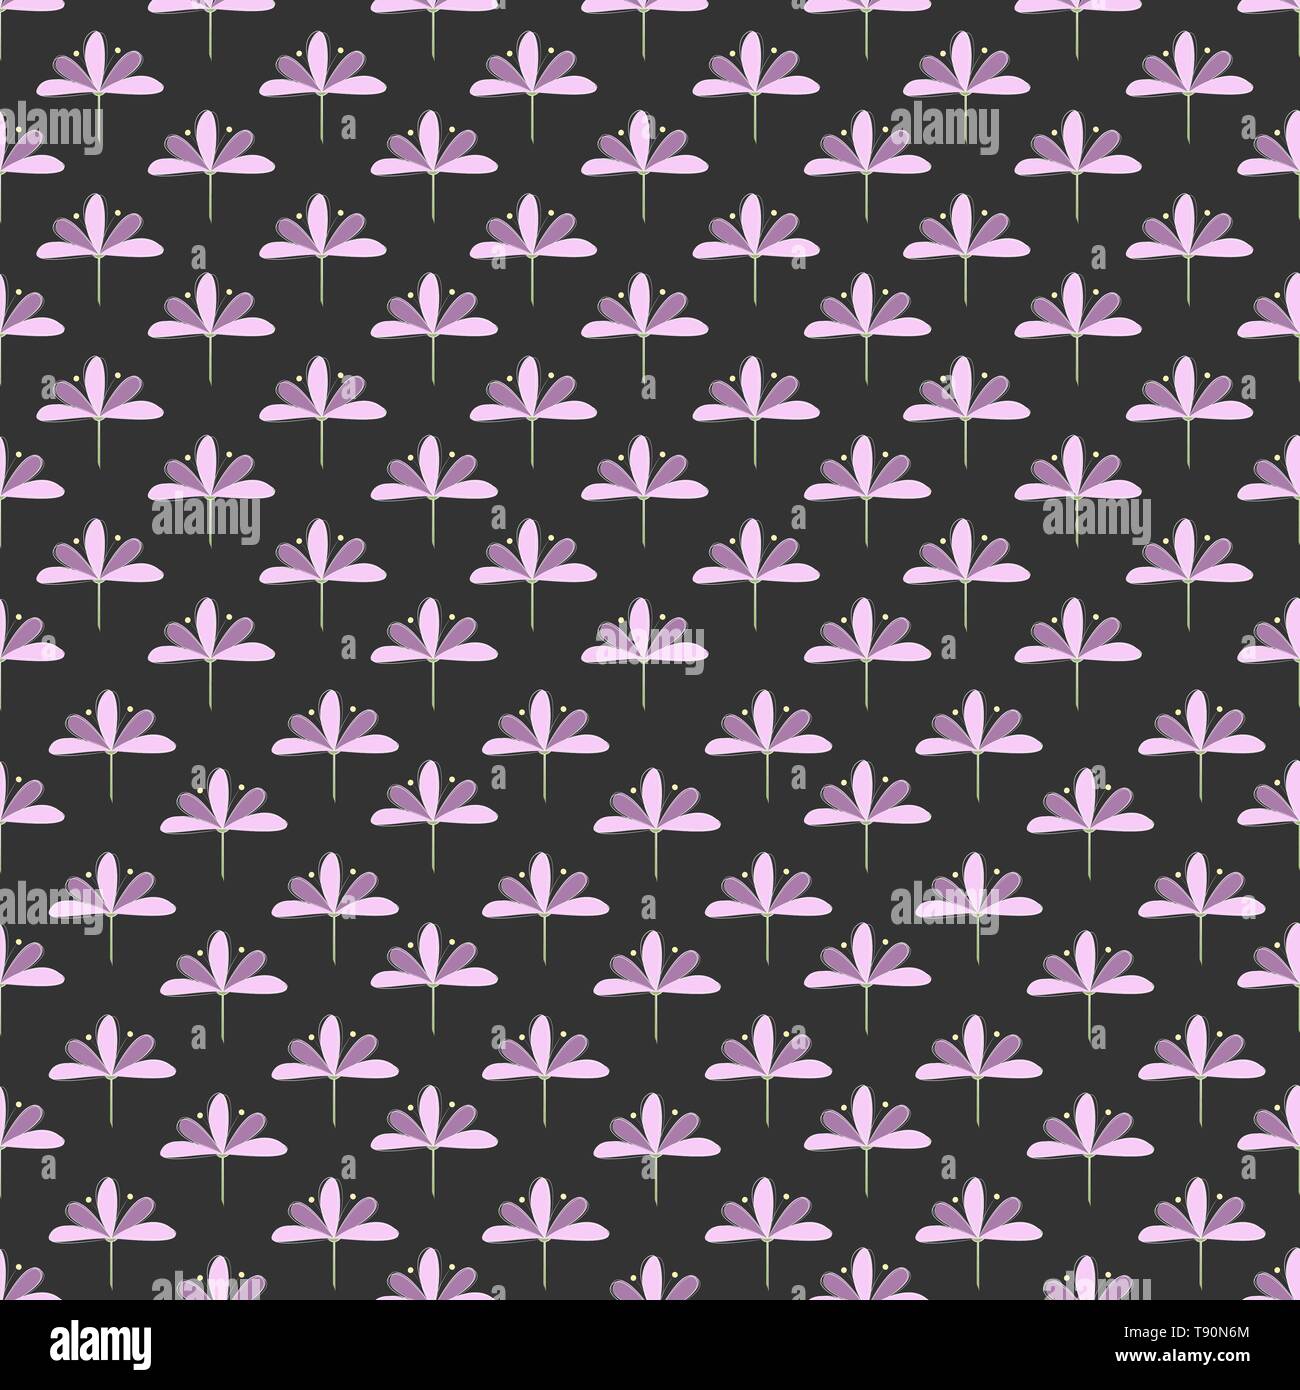 Seamless Pattern: Repeating Lila und Violet Blossoms on Dark Background. Stock Vector